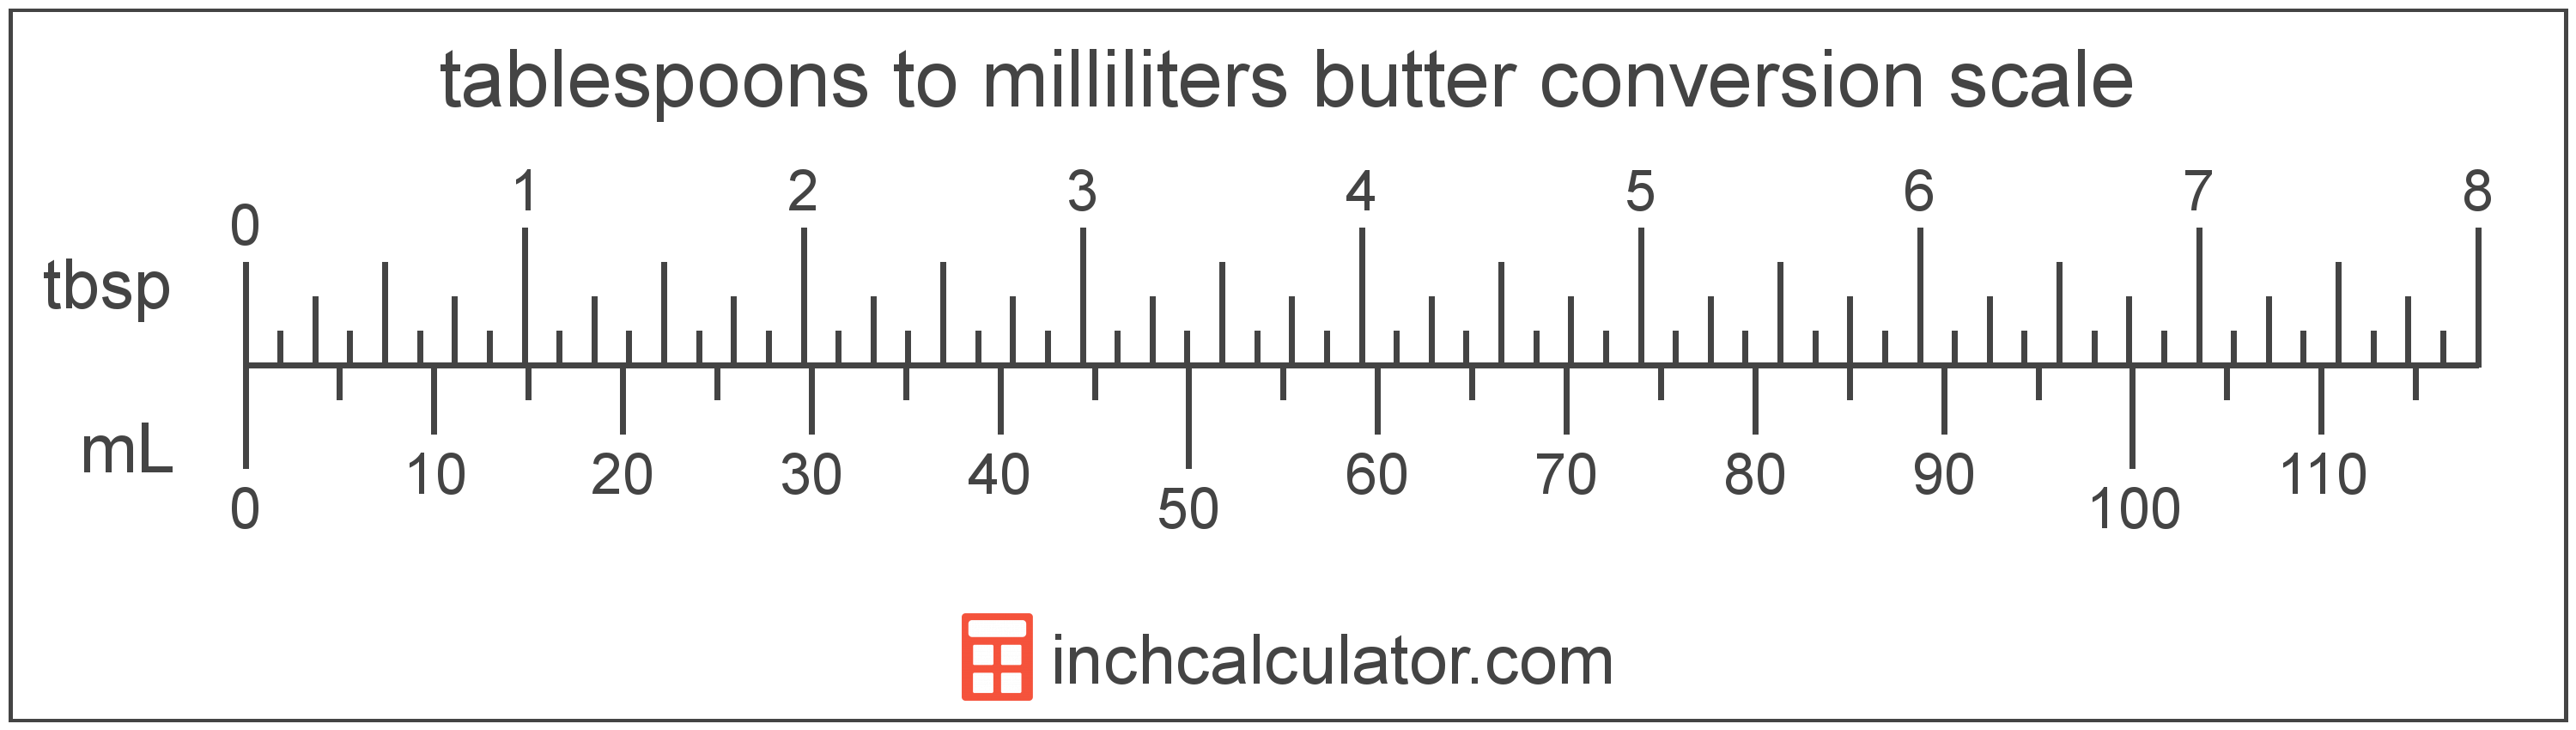 conversion scale showing milliliters and equivalent tablespoons butter values